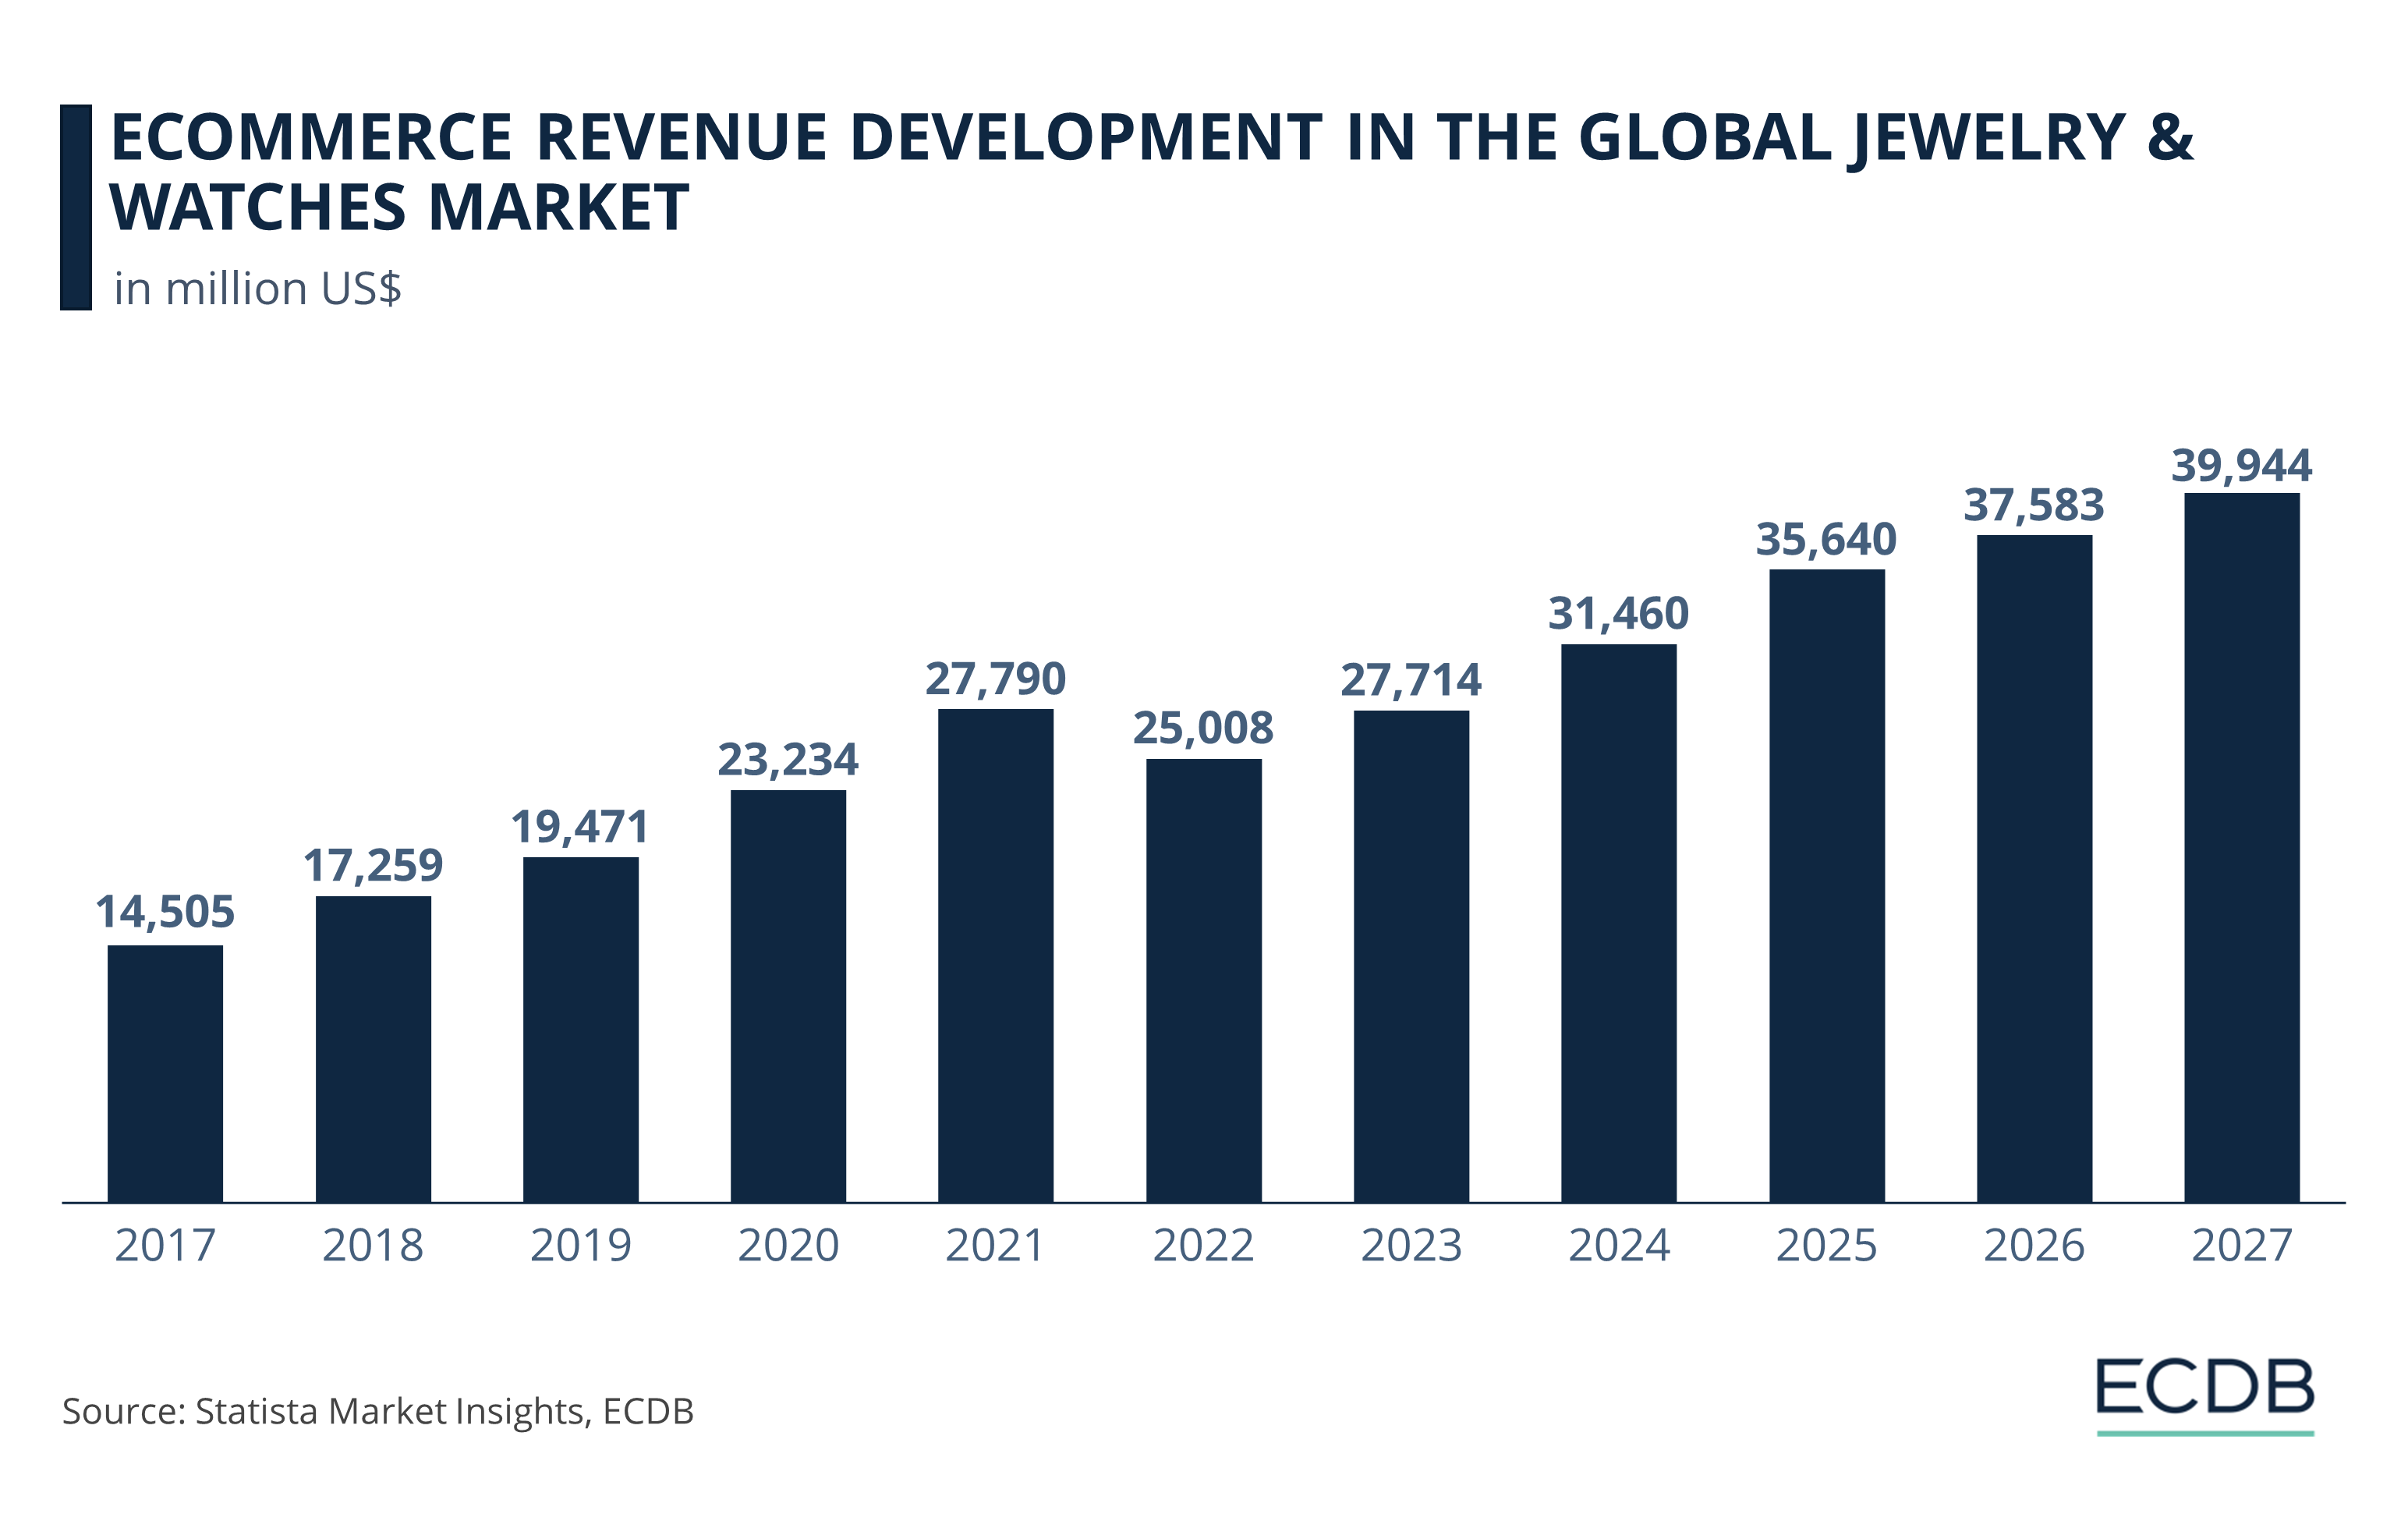 eCommerce Revenue Development in the Global Jewelry & Watches Market